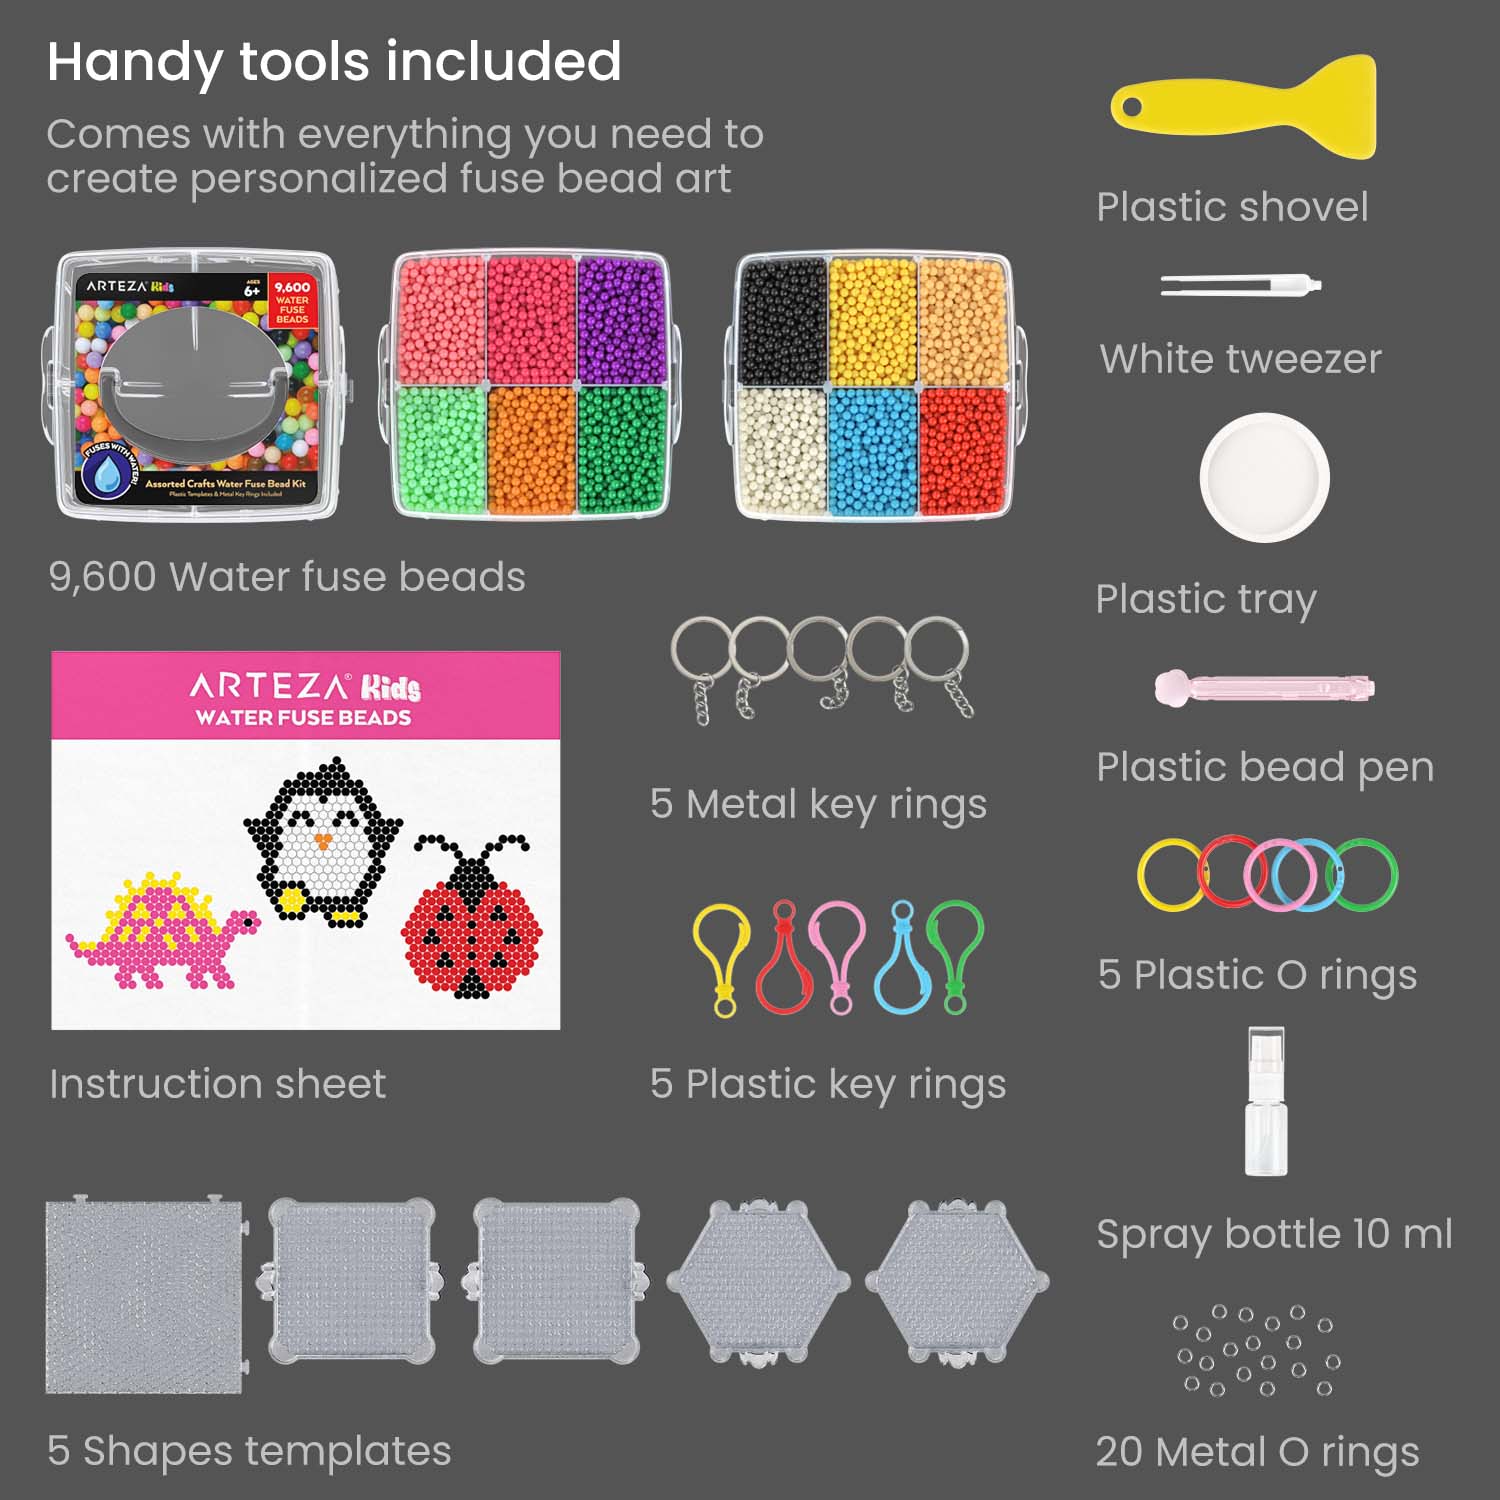 Aquabeads Beads (34 products) compare prices today »